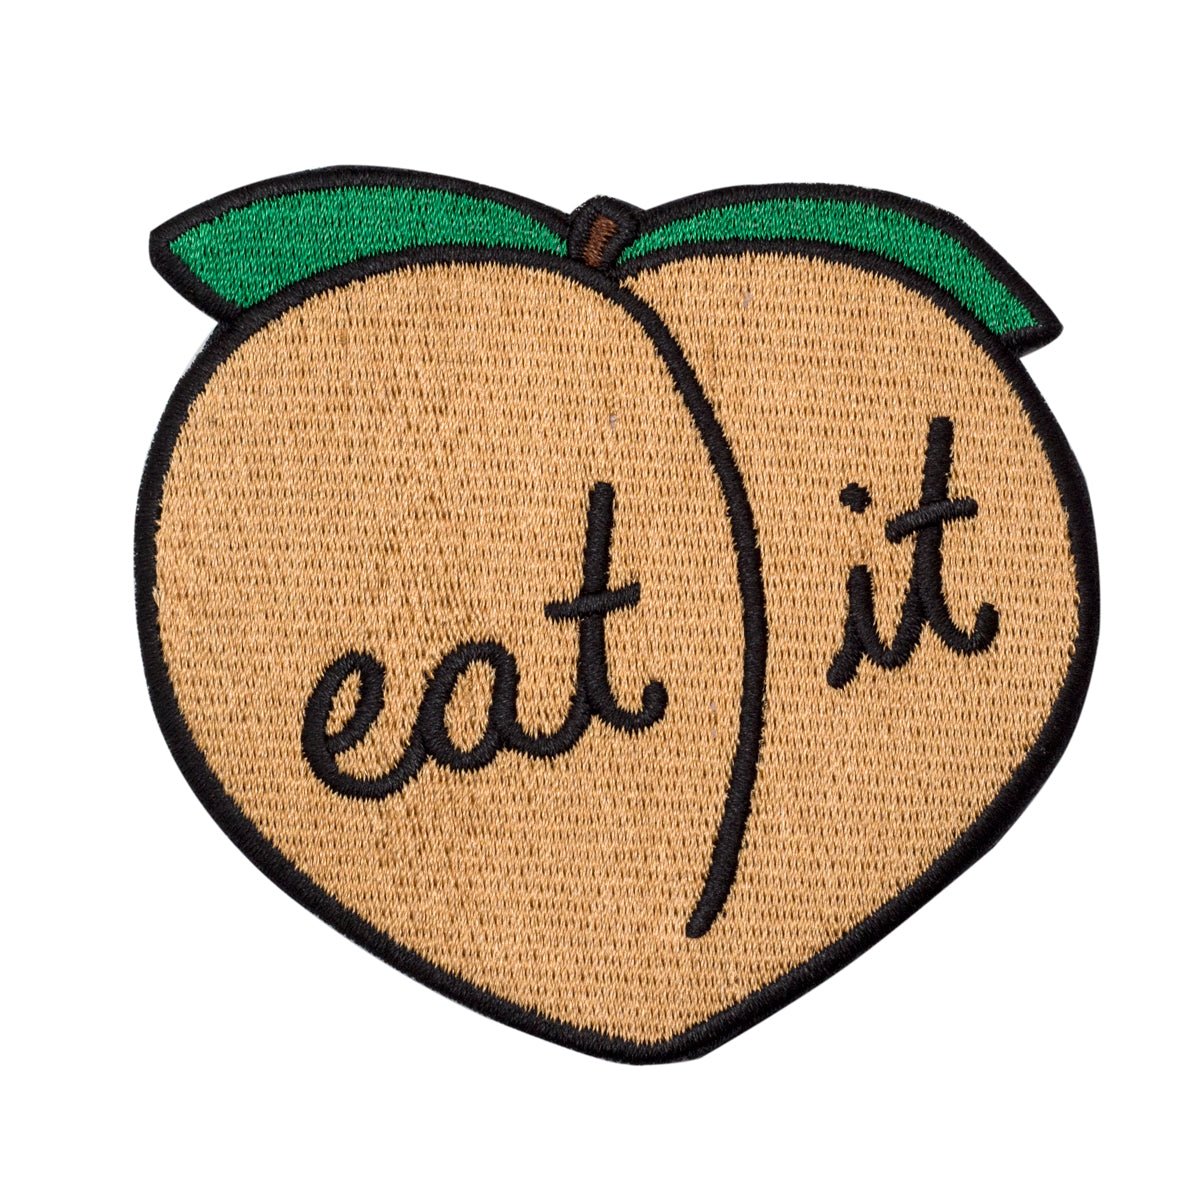 Eat It Peach Patch - Patch - Pretty Bad Co.